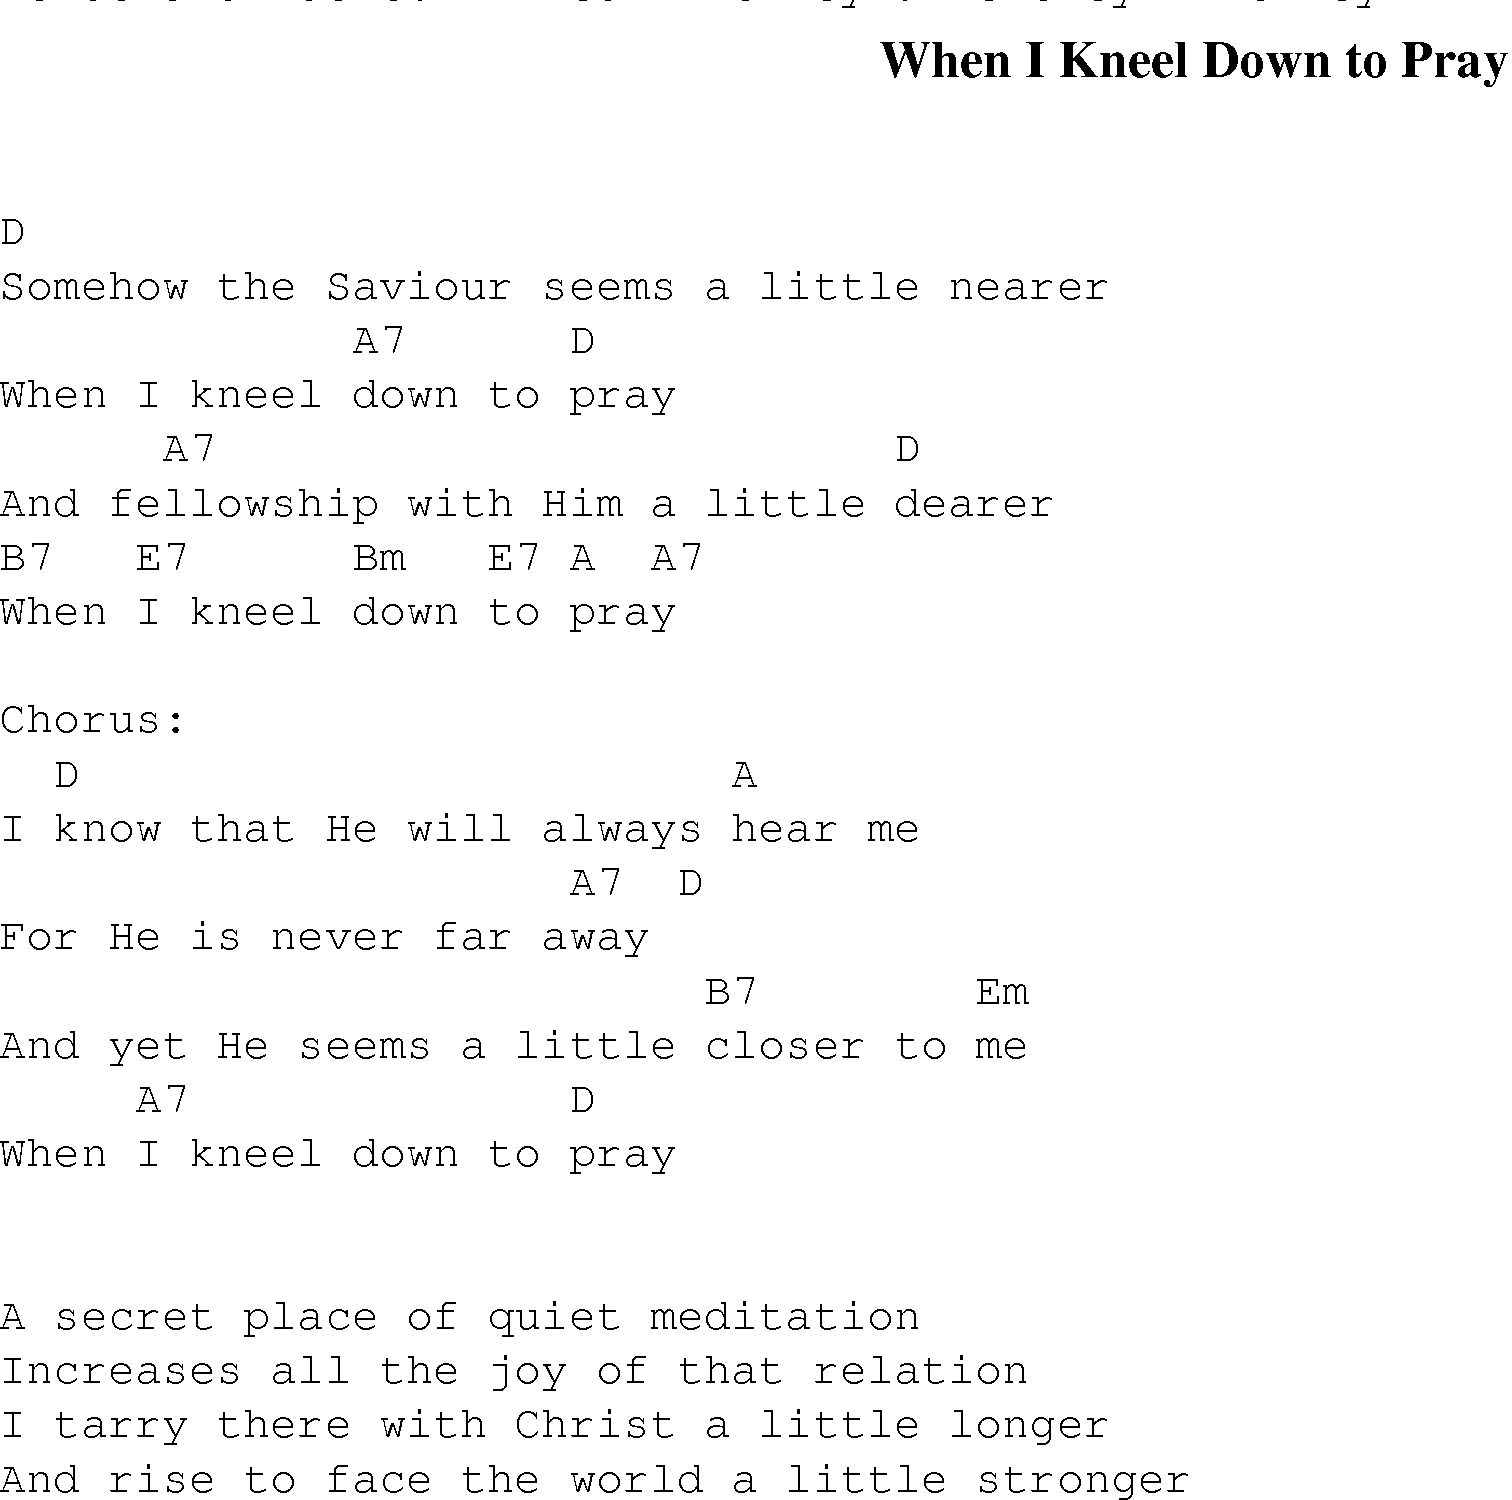 Gospel Song: when_i_kneel_down_to_pray, lyrics and chords.